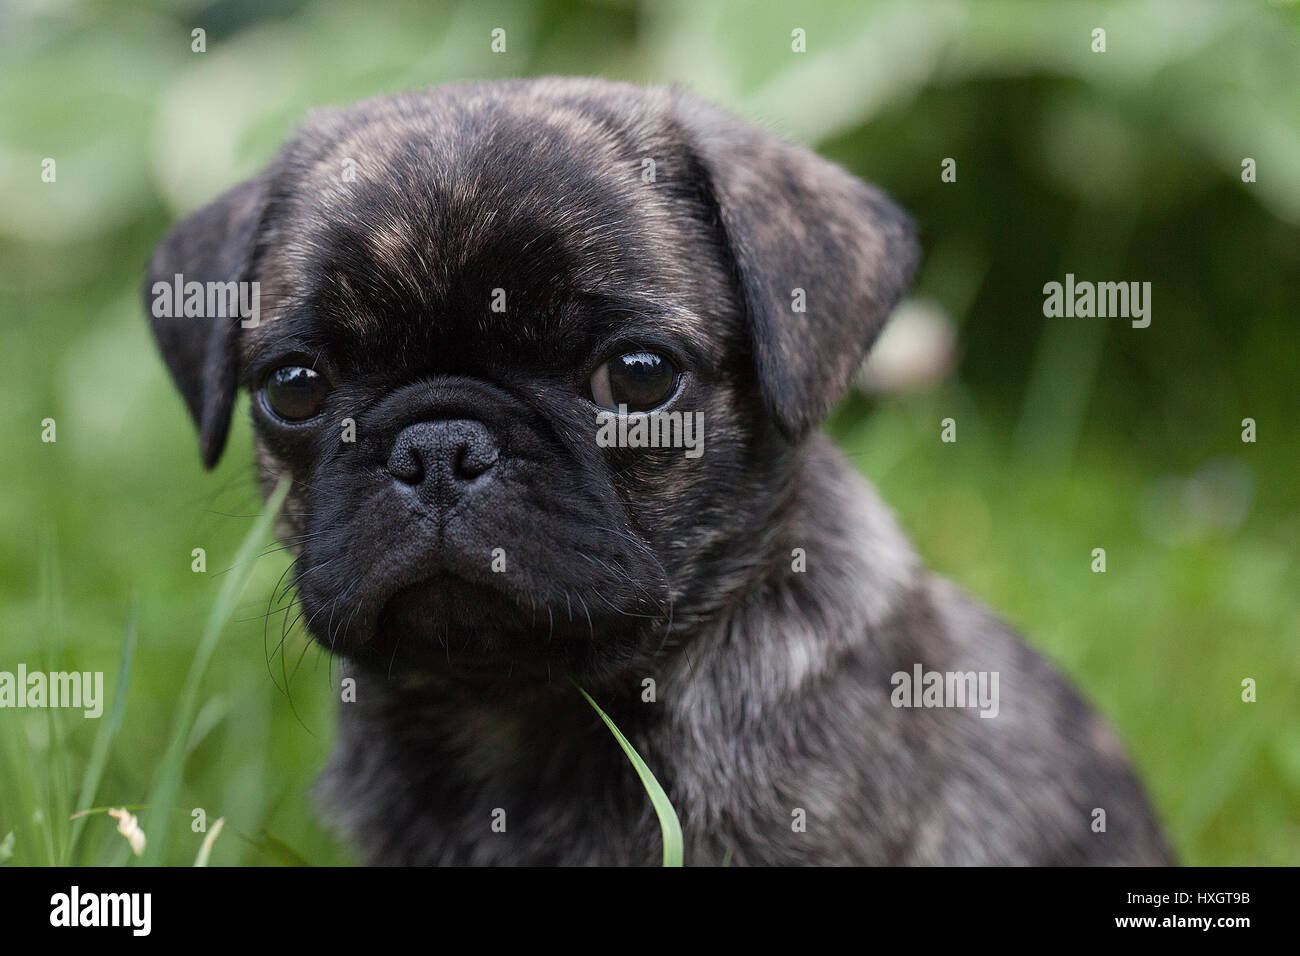 Portrait of a brindle pug puppy posing in the grass. Stock Photo